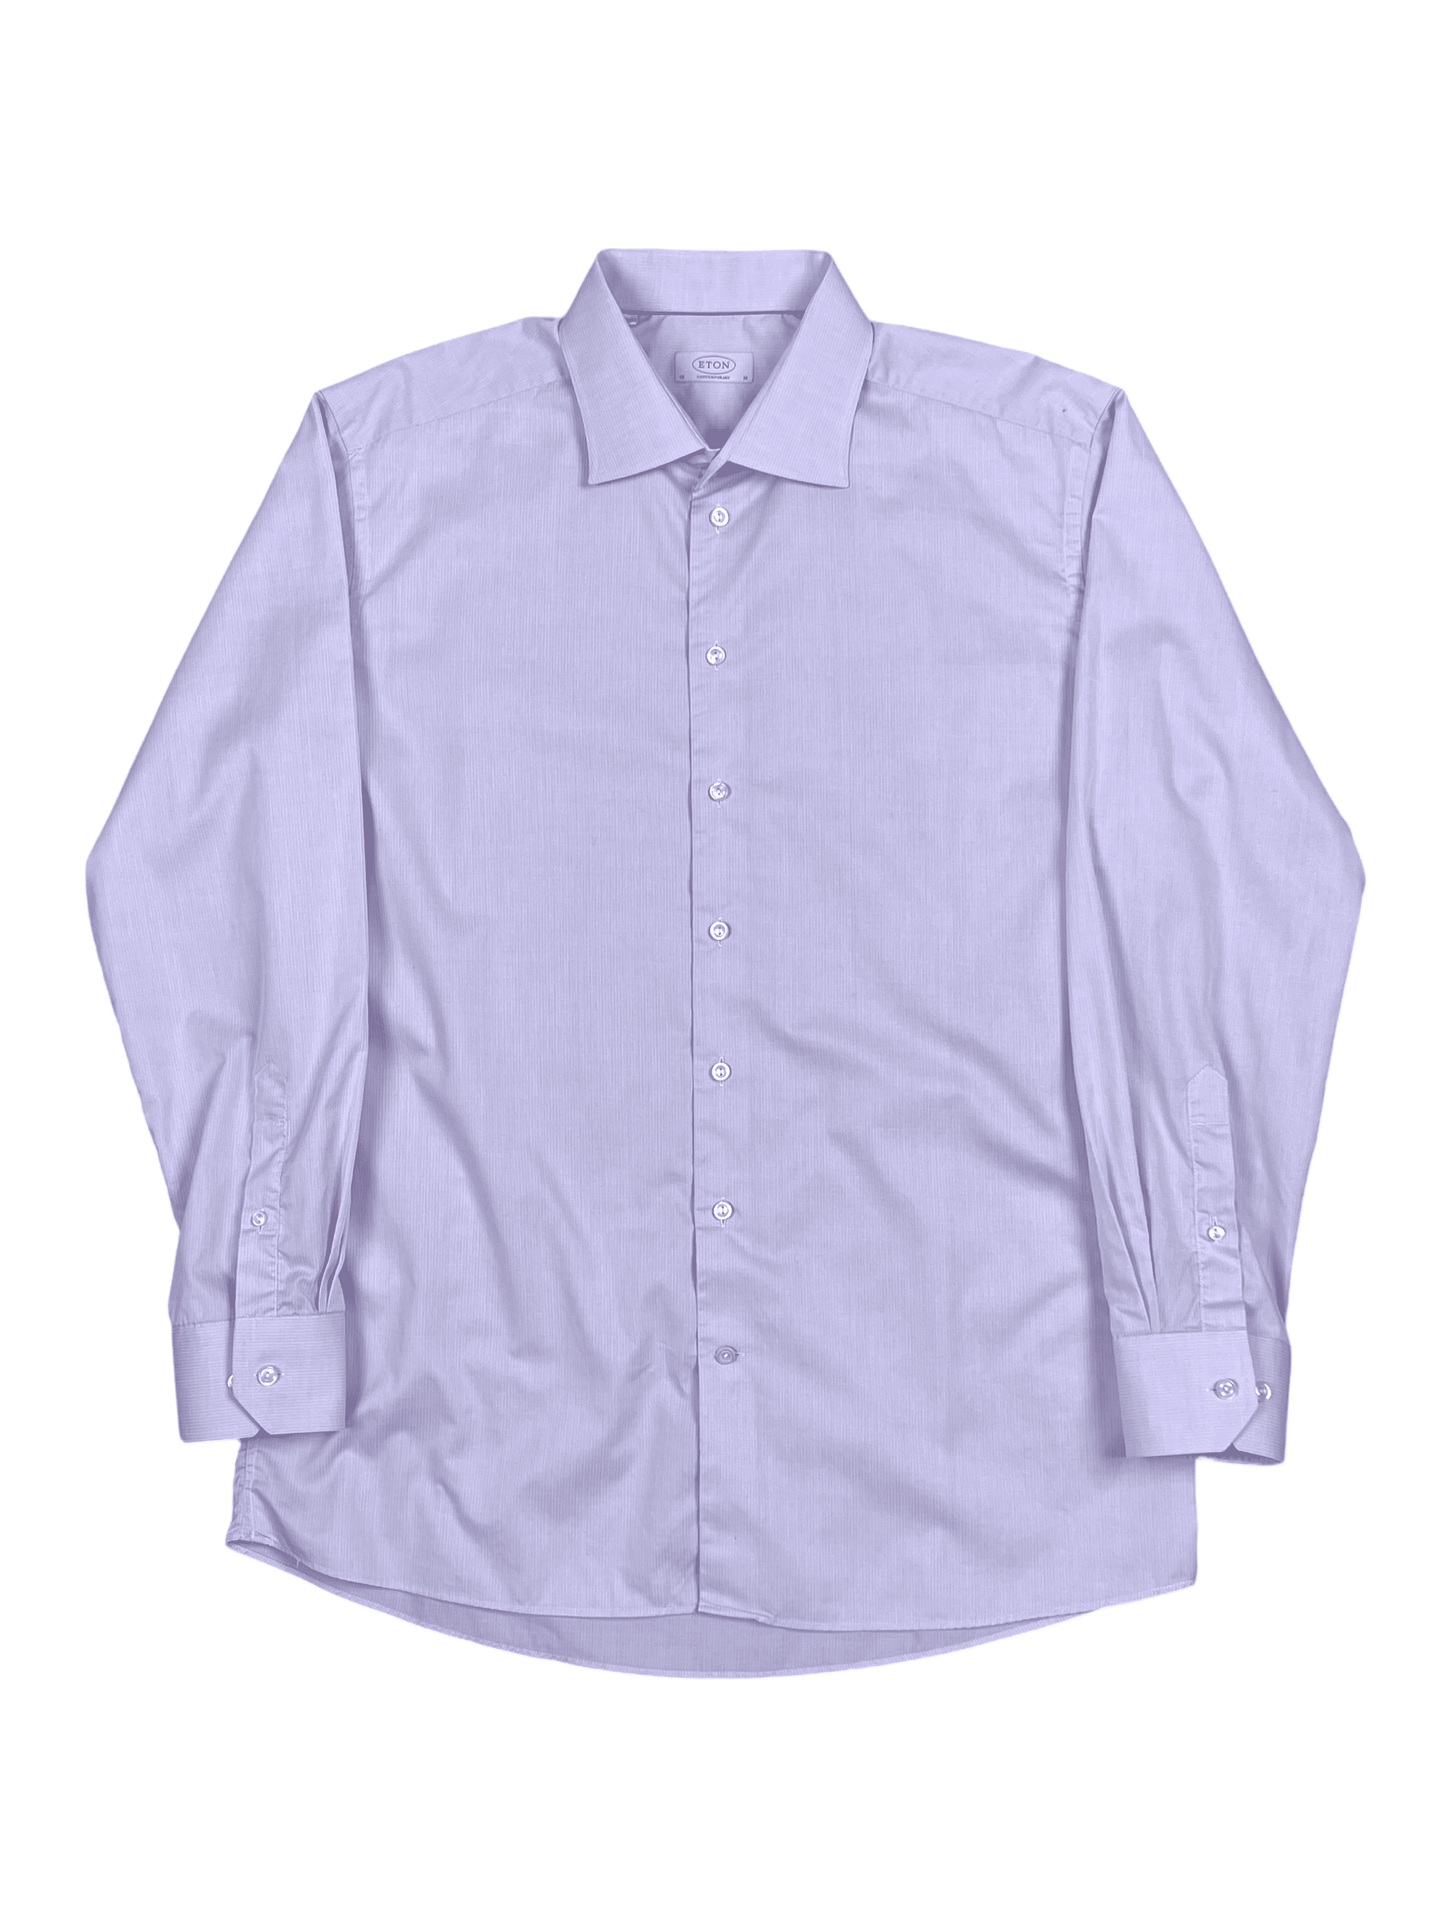 Eton Lavender Dress Shirt  18 / 46 - Genuine Design Luxury Consignment for Men. New & Pre-Owned Clothing, Shoes, & Accessories. Calgary, Canada